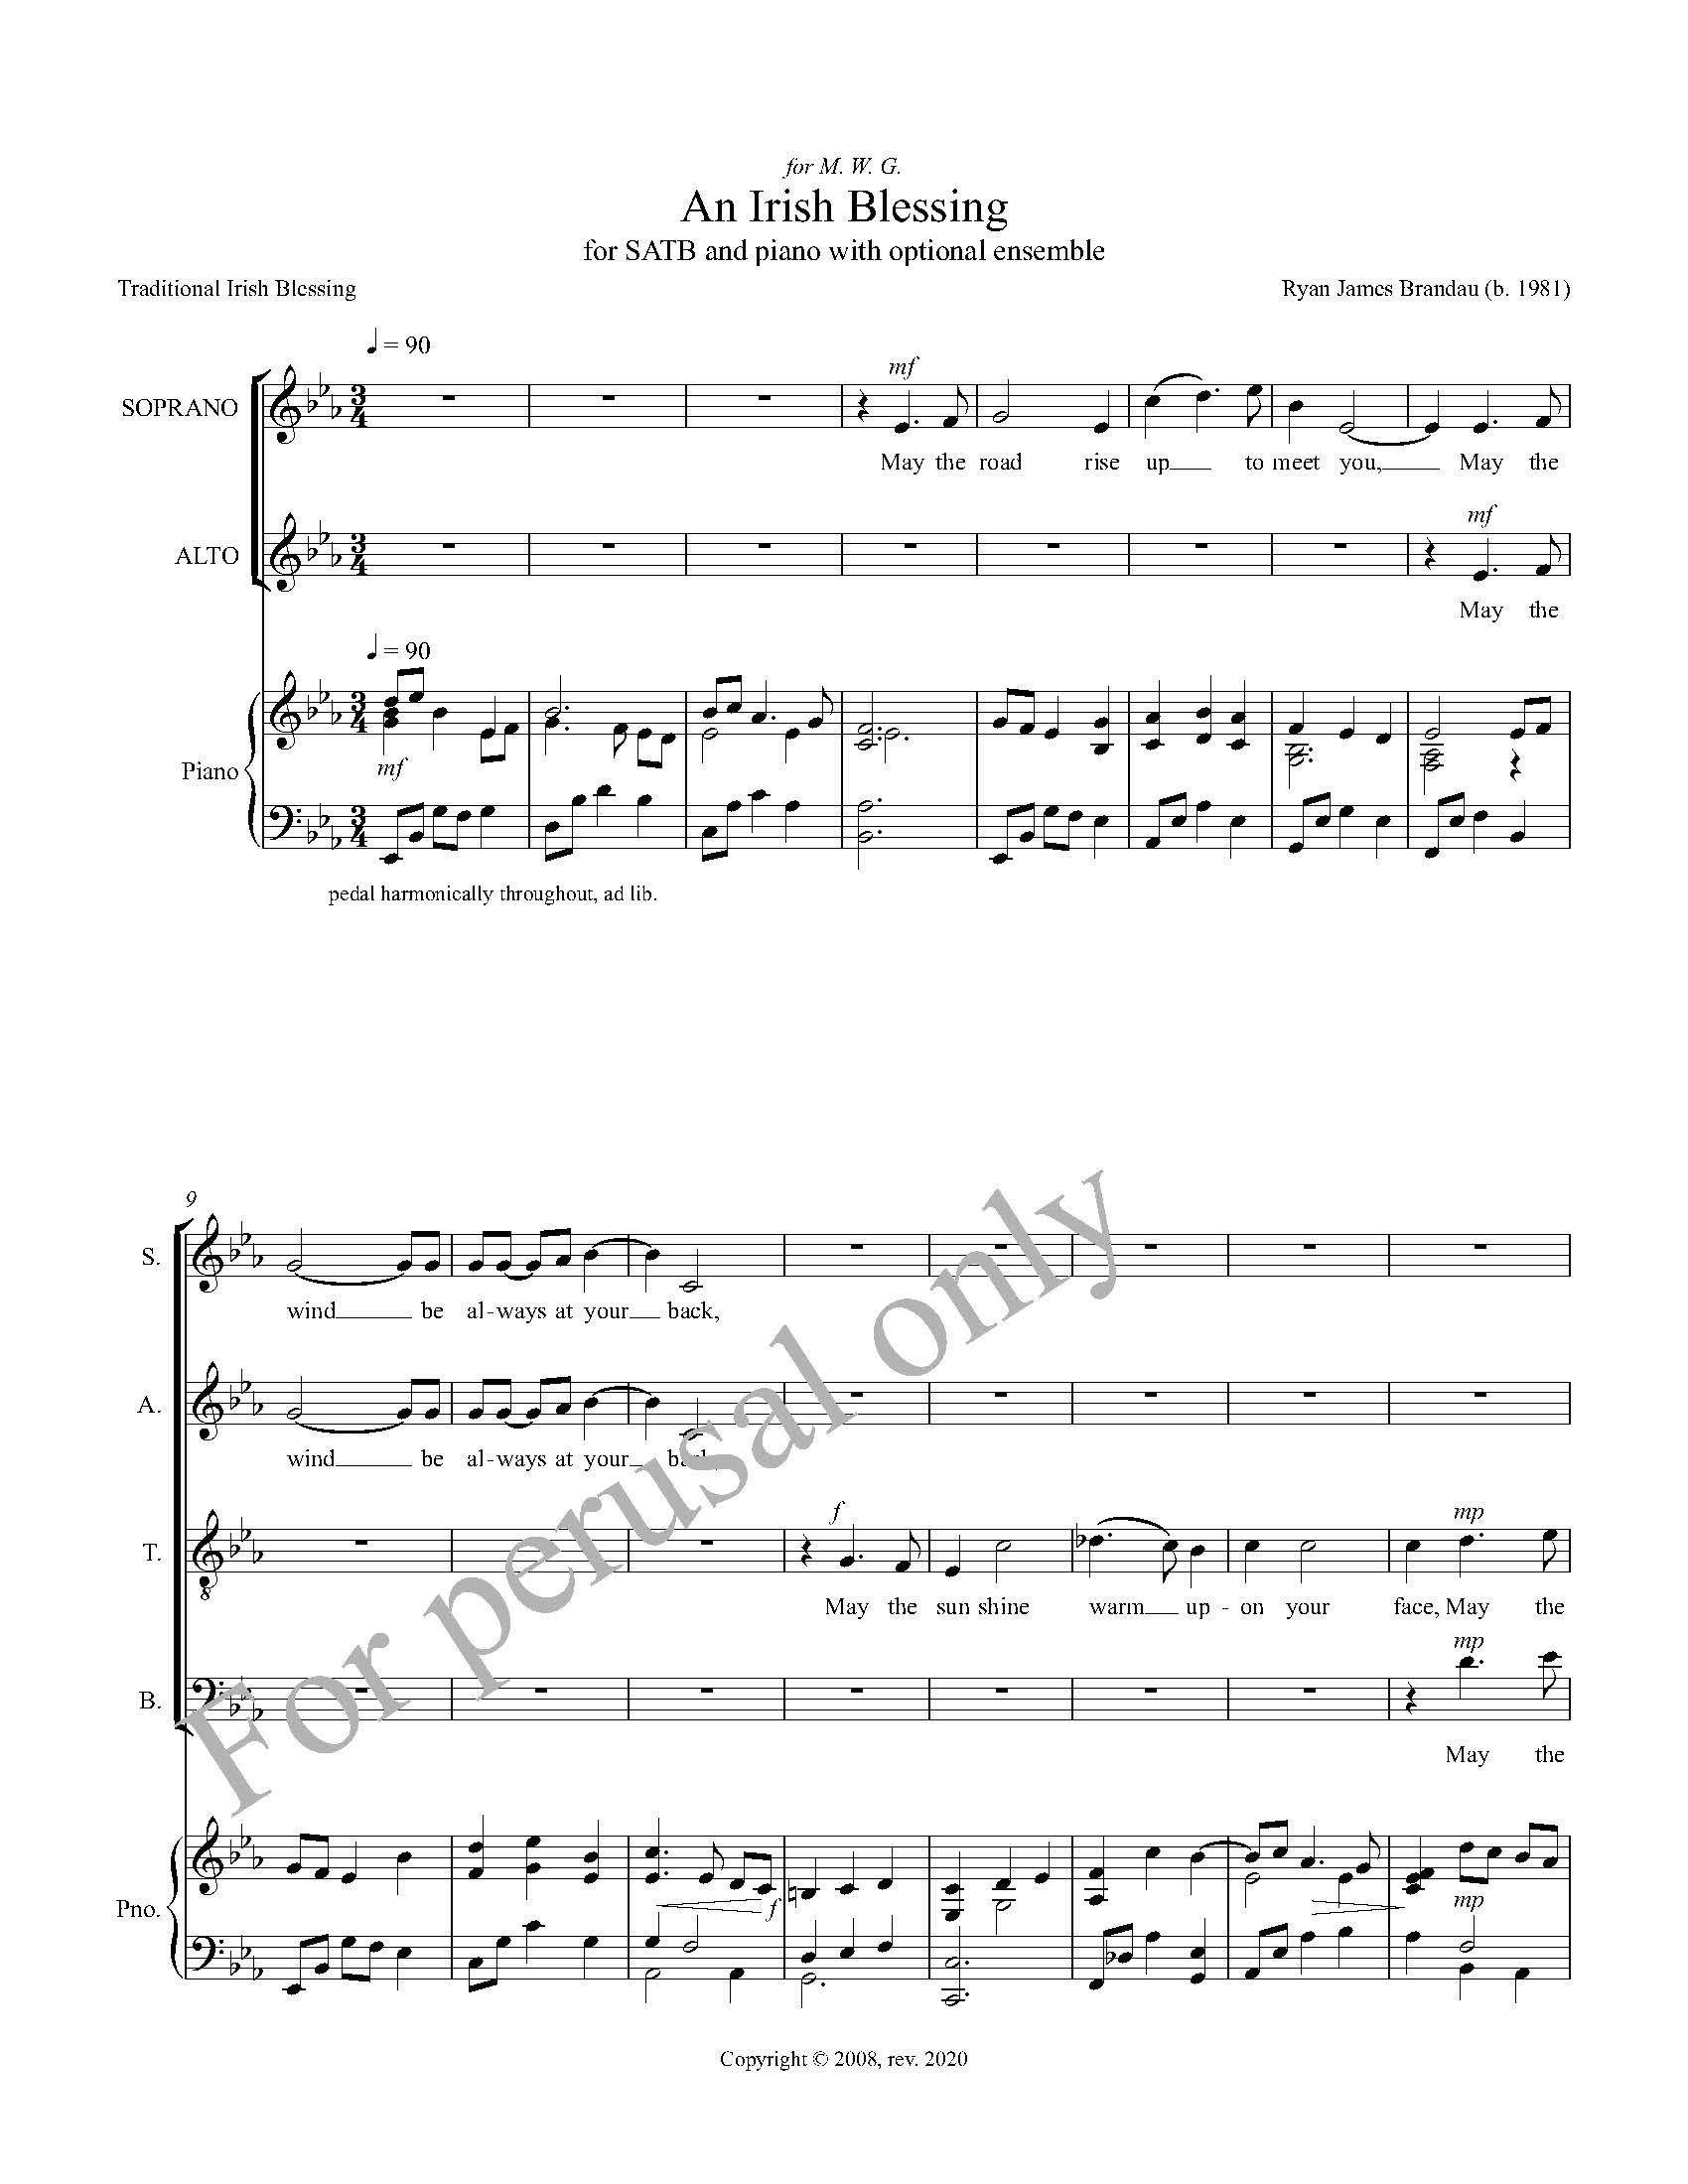 SCORE - preview An Irish Blessing for SATB and piano by Ryan James Brandau_Page_1.jpg